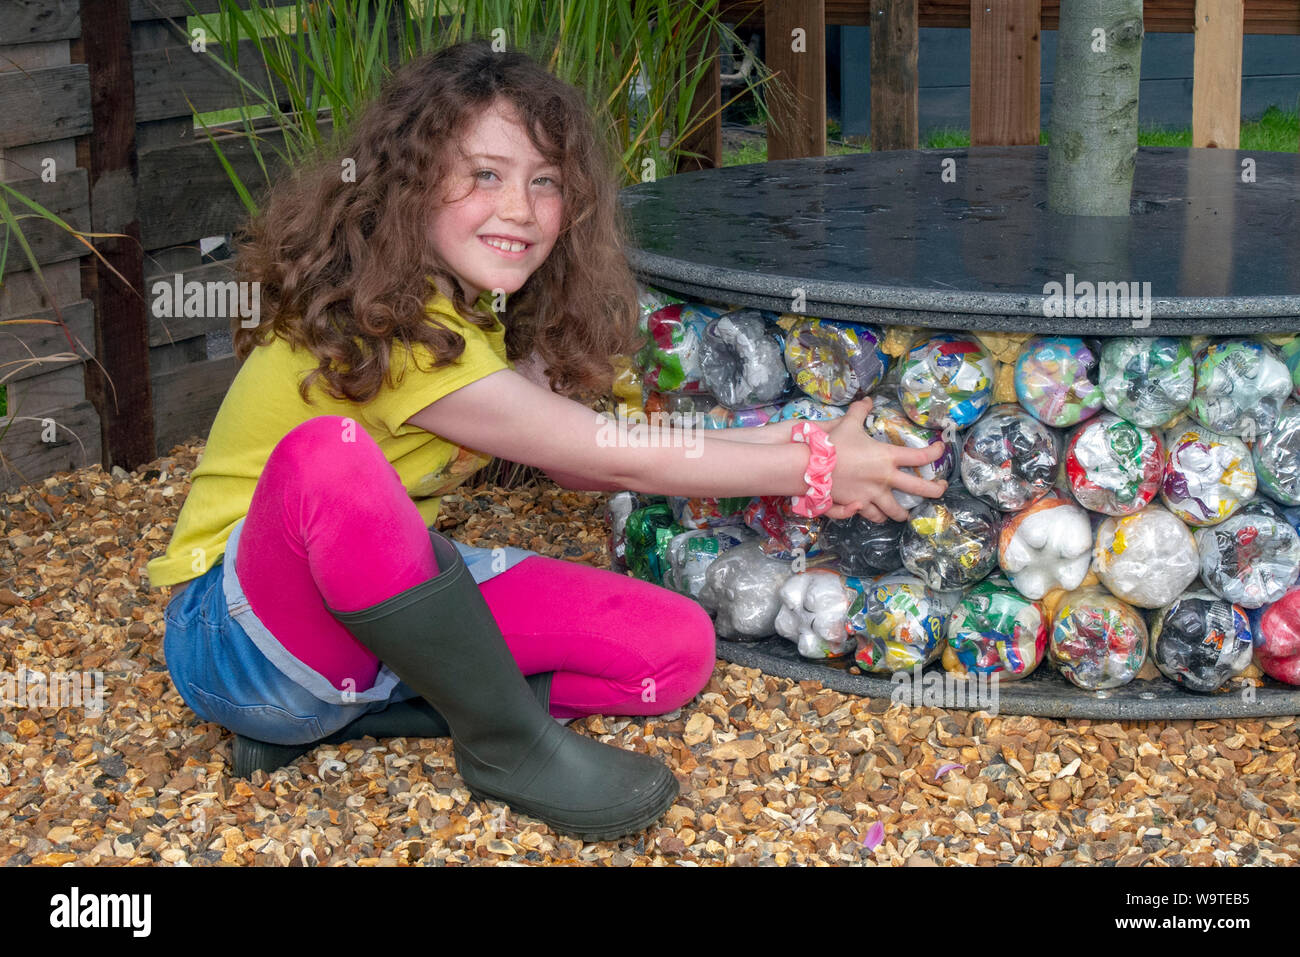 Southport, Merseyside. UK Weather.  Aug, 2019. 9 year old Silvie McGuiness & Upcycled reused plastic bottle tree seat in Victoria Park. Katie from Wigan council in the Waste Not Want upcycling garden Not garden. The first Southport Flower Show was held in the 1920s, organised by local businessmen who wanted to celebrate the region’s horticulture. It has grown into Britain’s largest independent flower show and one of the highlights of the north-west’s summer calendar. Stock Photo